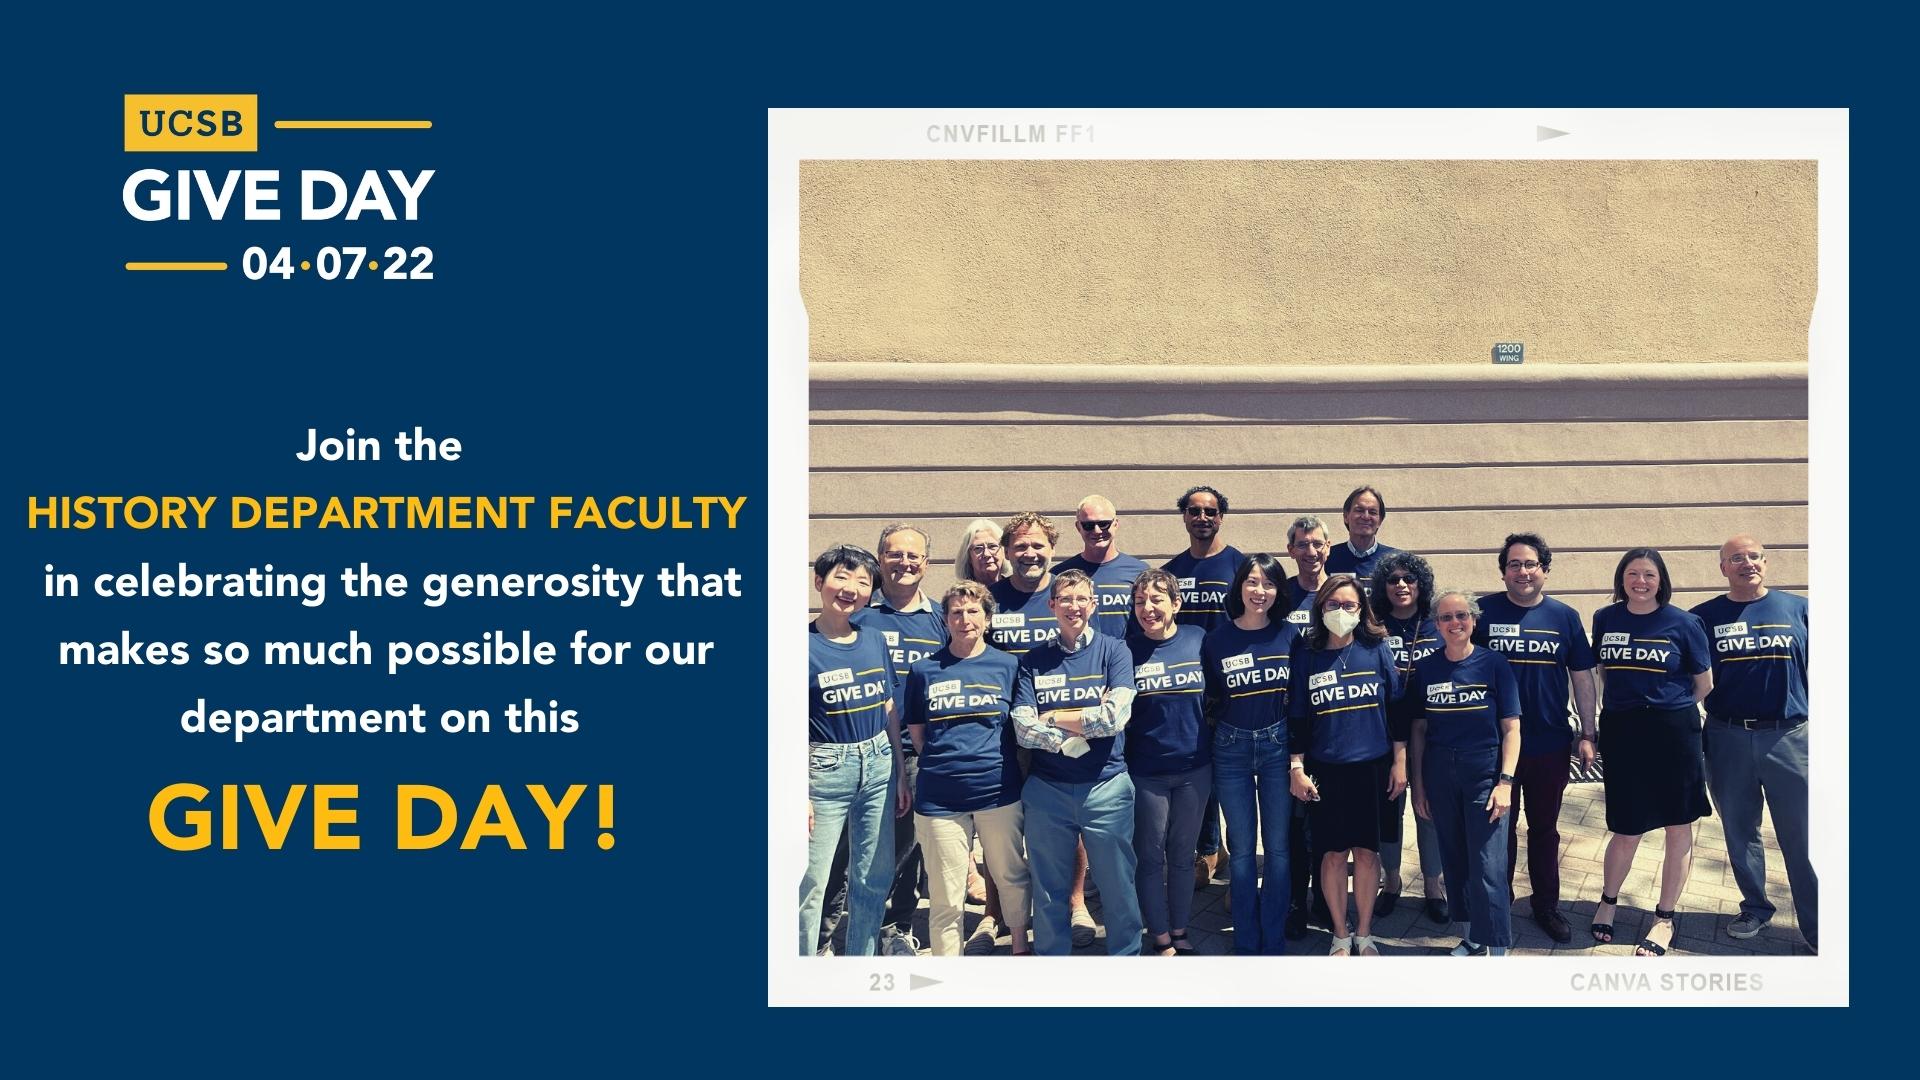 Flyer for UCSB Give Day on April 7, 2022: Join the History Department Faculty in celebrating the generosity that makes so much possible for our department on this give day!